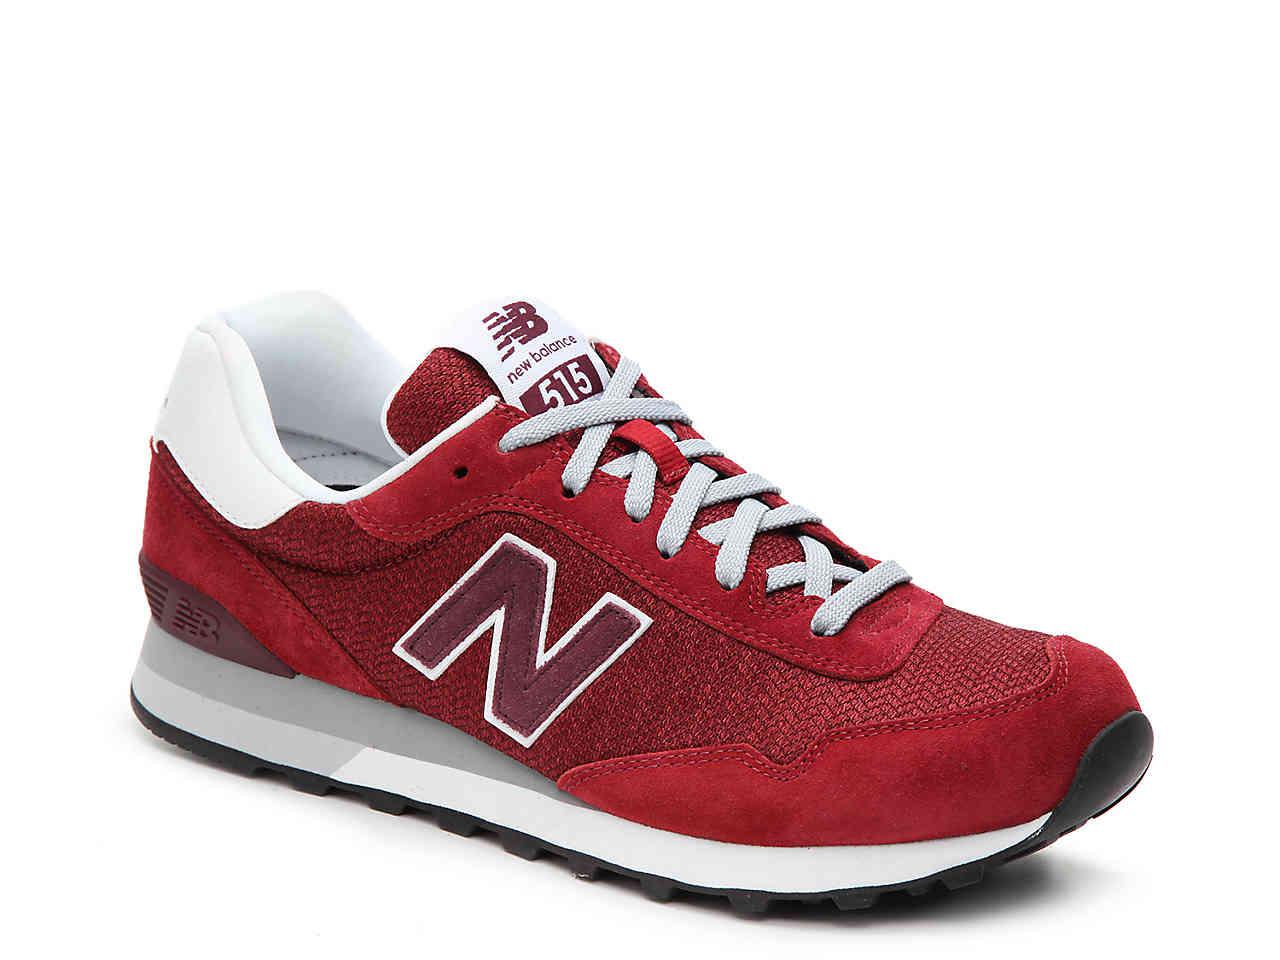 New Balance Suede 515 Retro Sneaker in Red/White (Red) for Men - Lyst